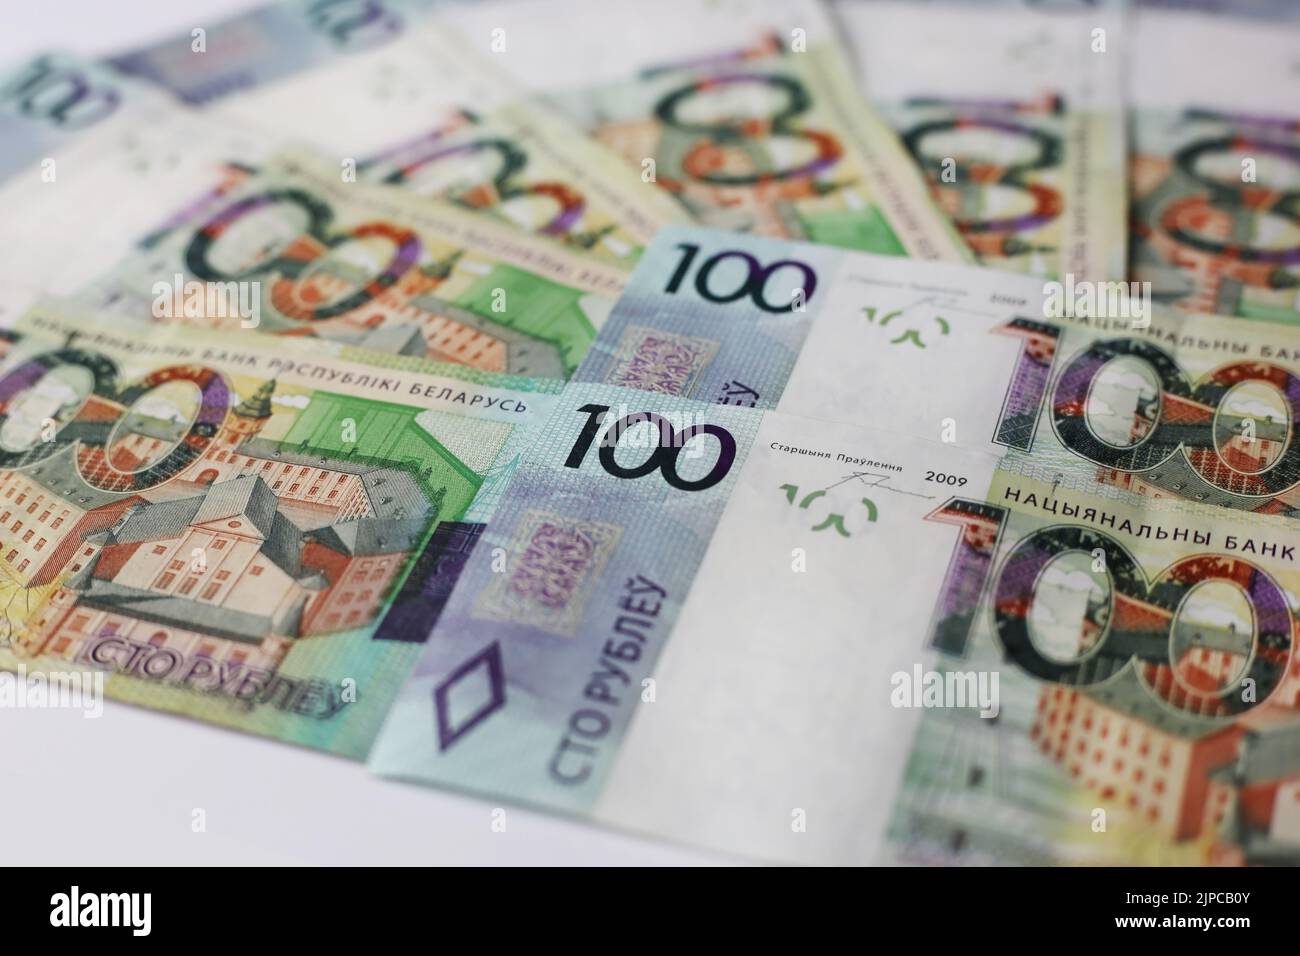 Banknotes of 100 belarusian rubles laid out on an isolated background Stock Photo